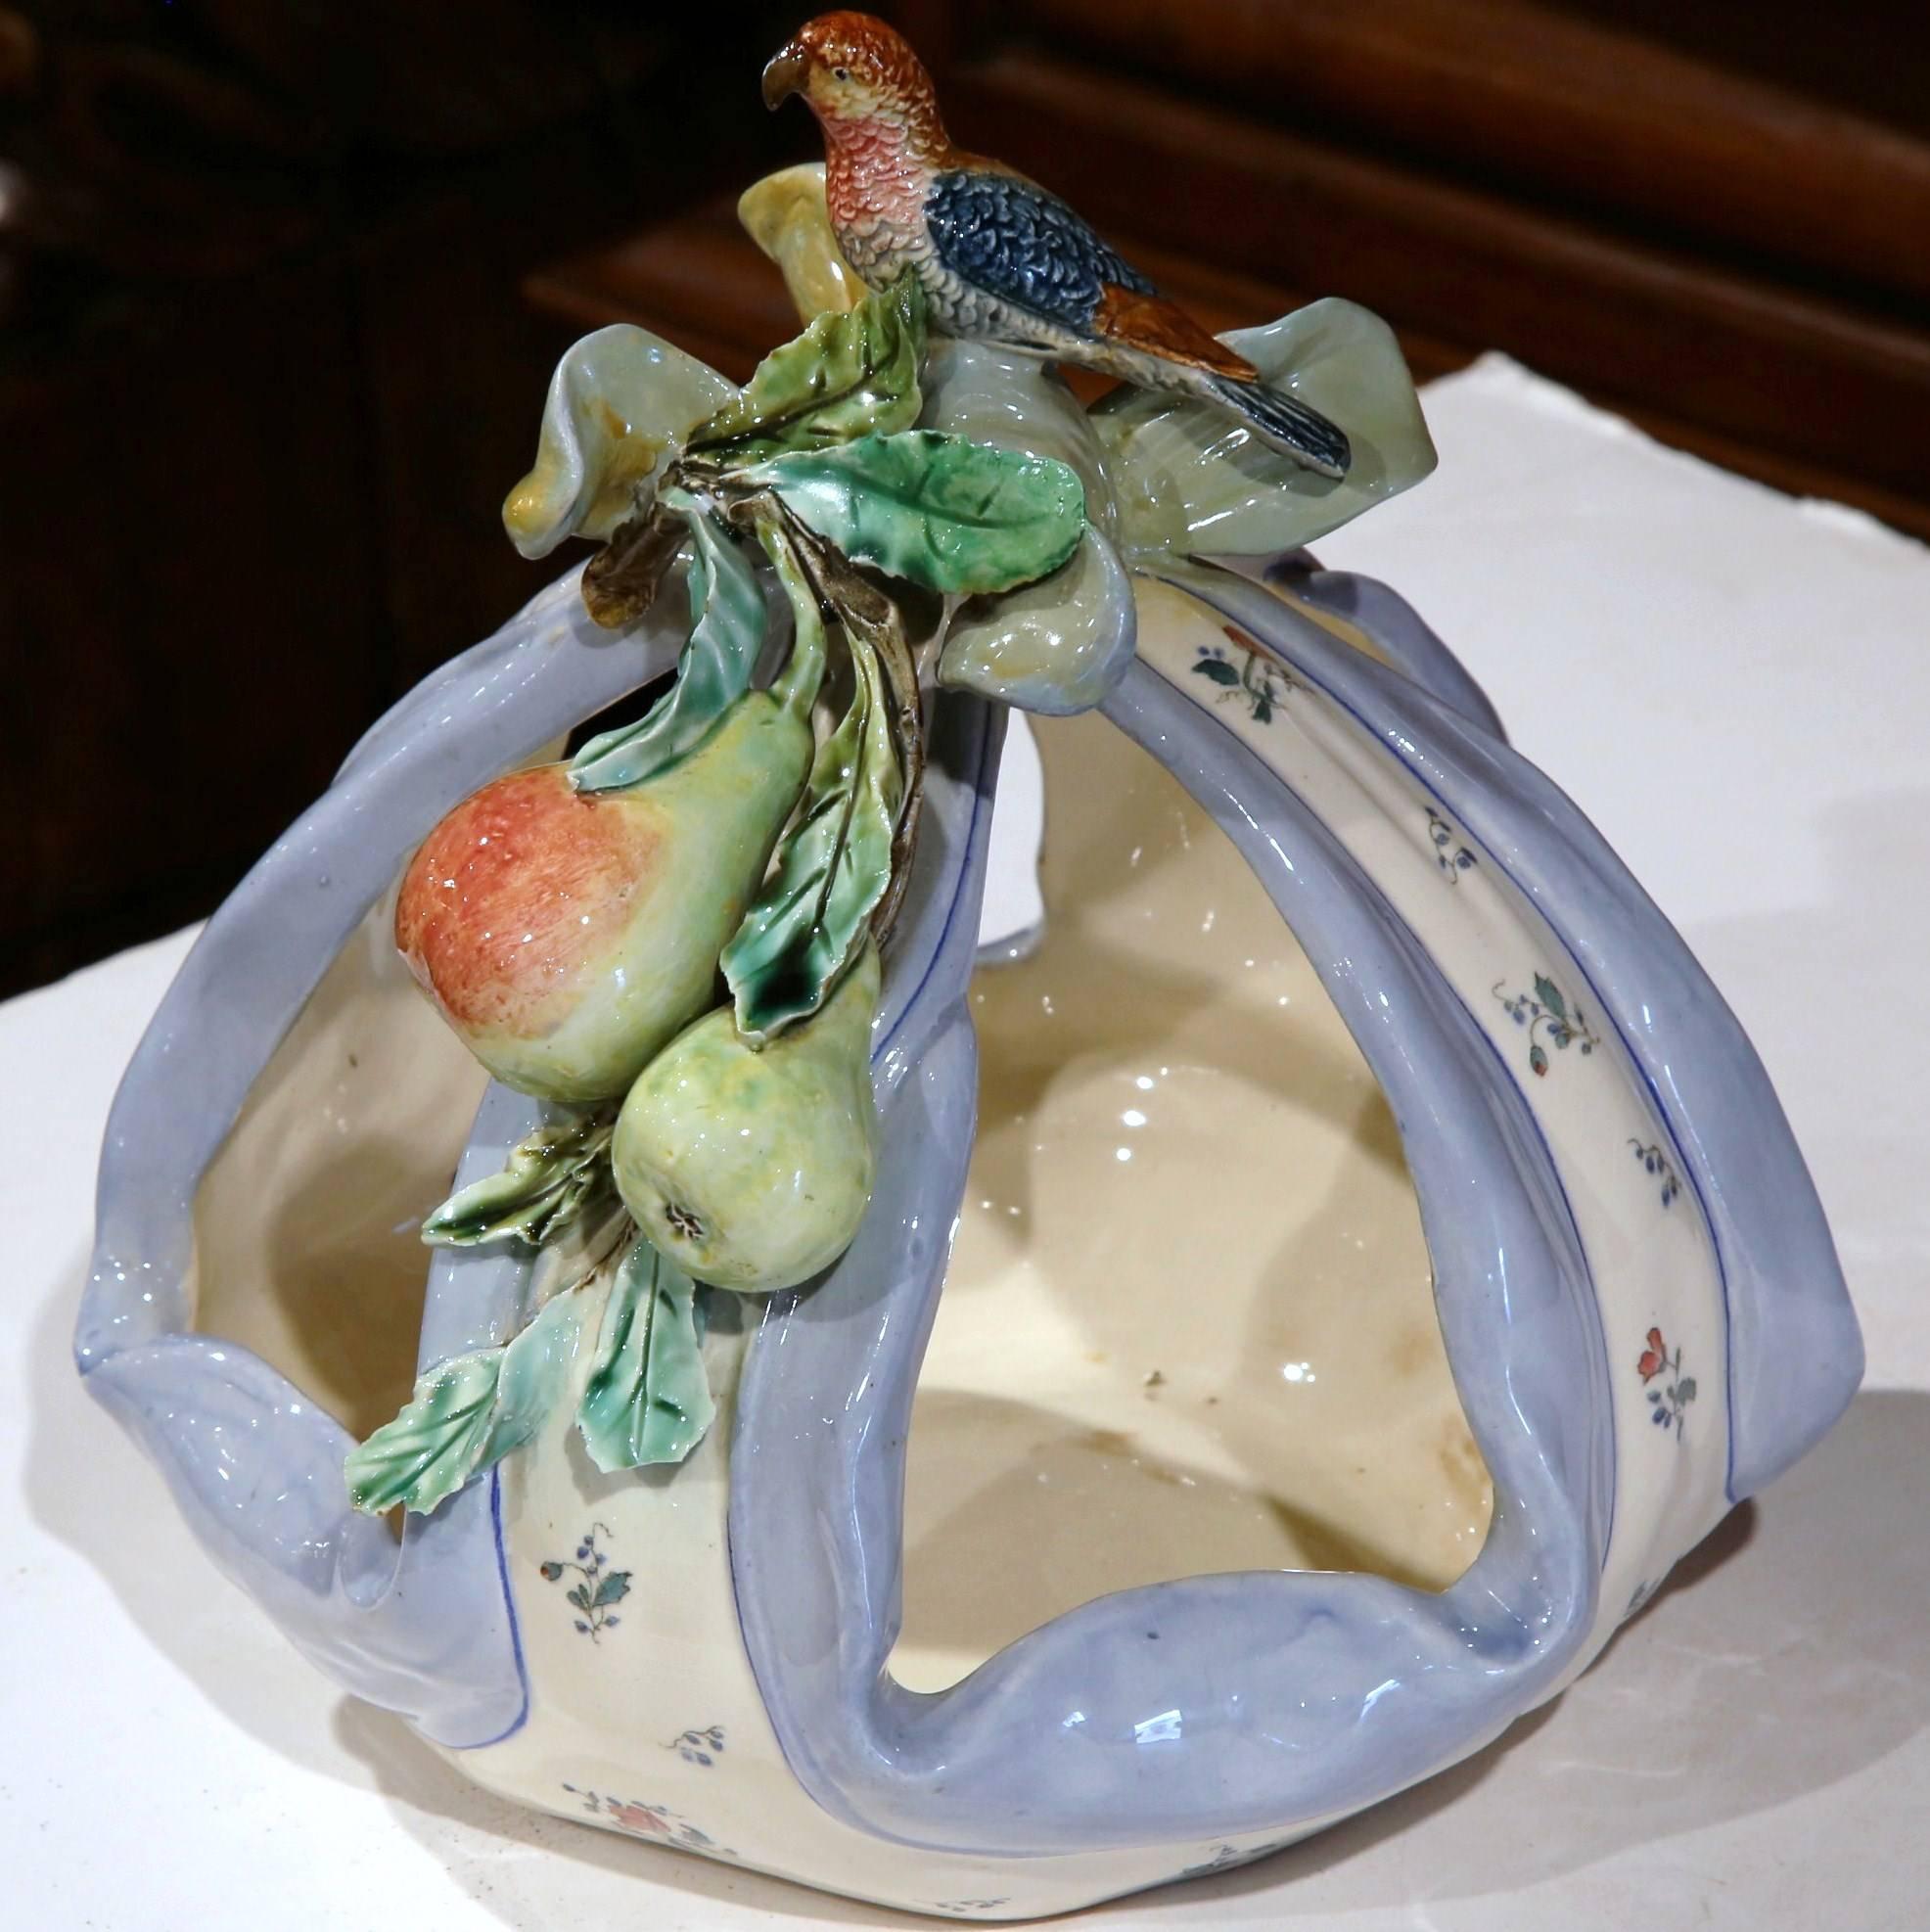 Beautiful antique Majolica centrepiece from Provence, France; crafted circa 1880, the ceramic fruit basket is shaped as center bow decorated with flowers. The top of the basket features two pears with leaf decor and a colorful bird standing at the